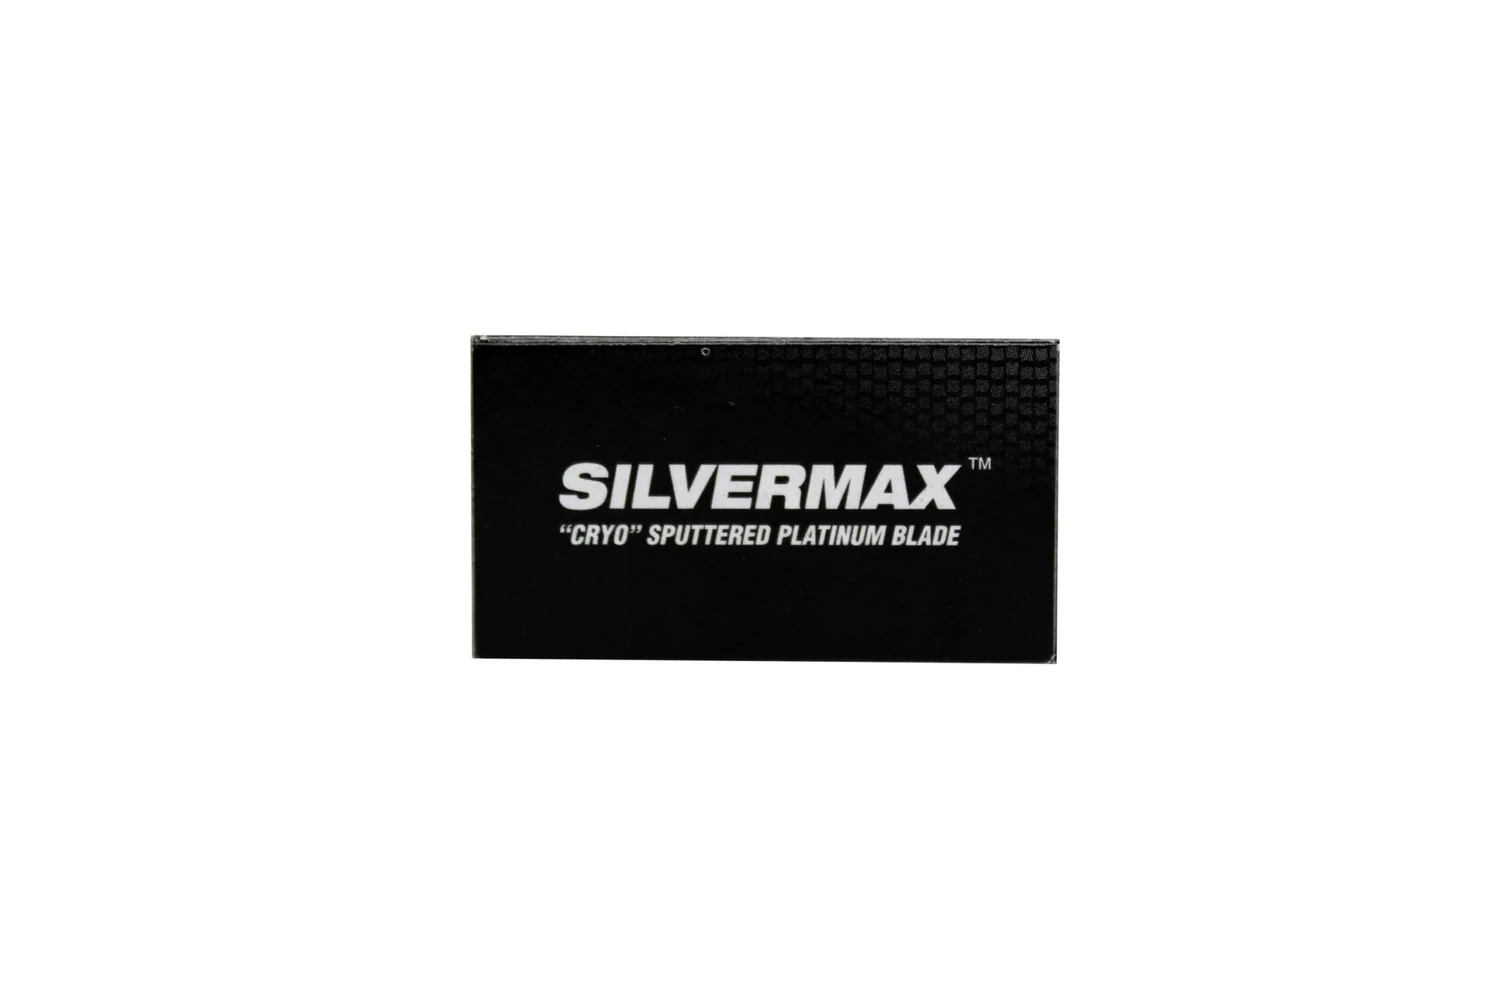 Silvermax "Cryo" Sputtered Platinum Double Edge Razor Blades, 10 Count